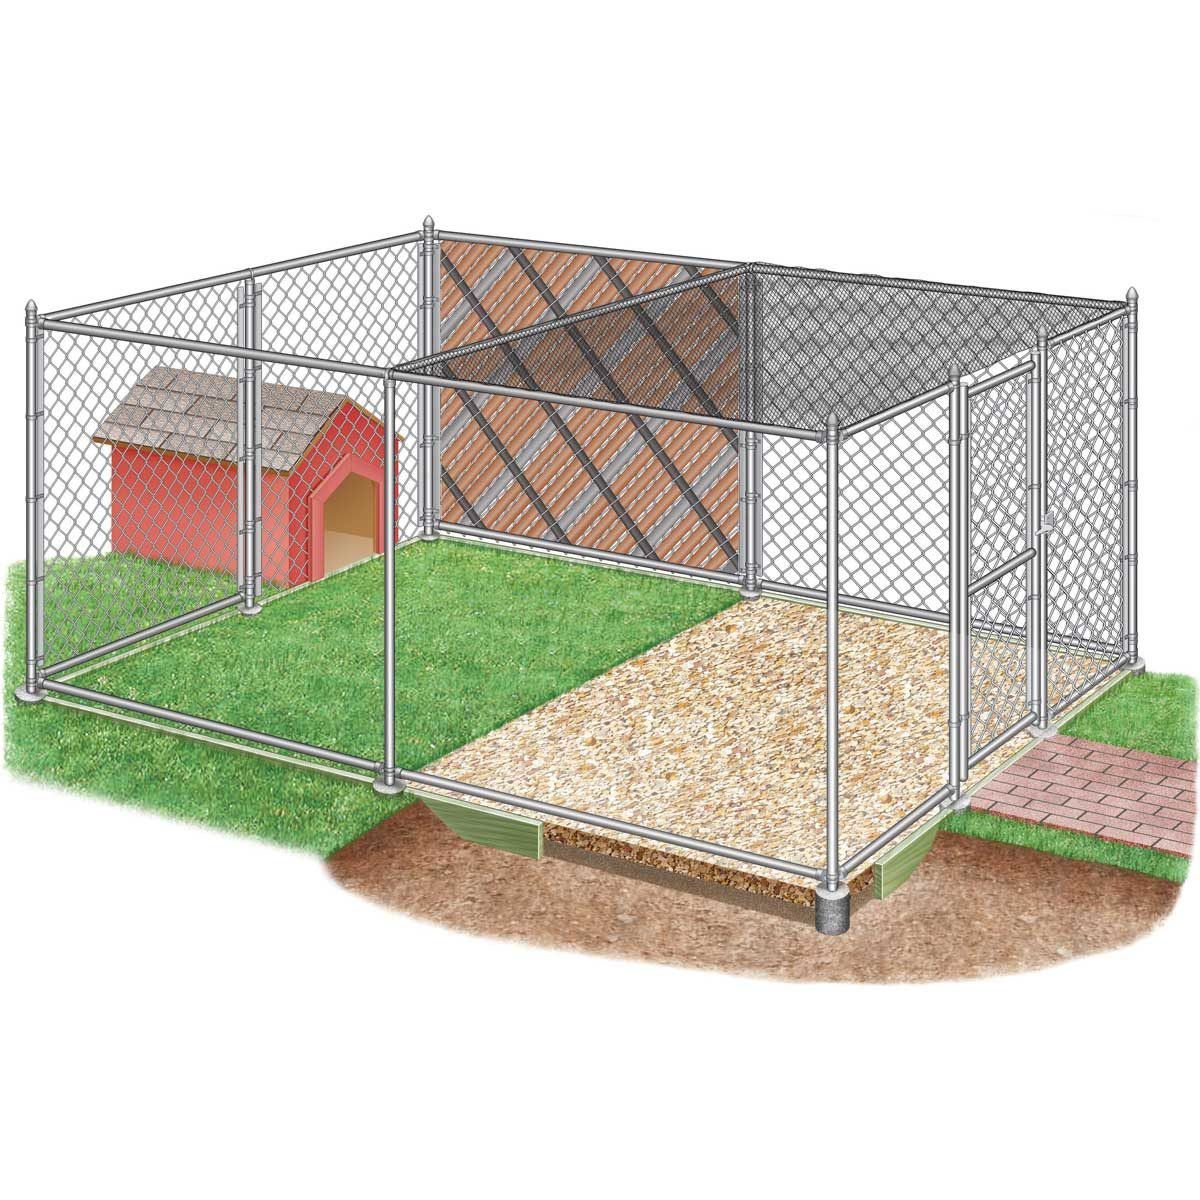 How to Build a DIY Chain Link Dog Kennel